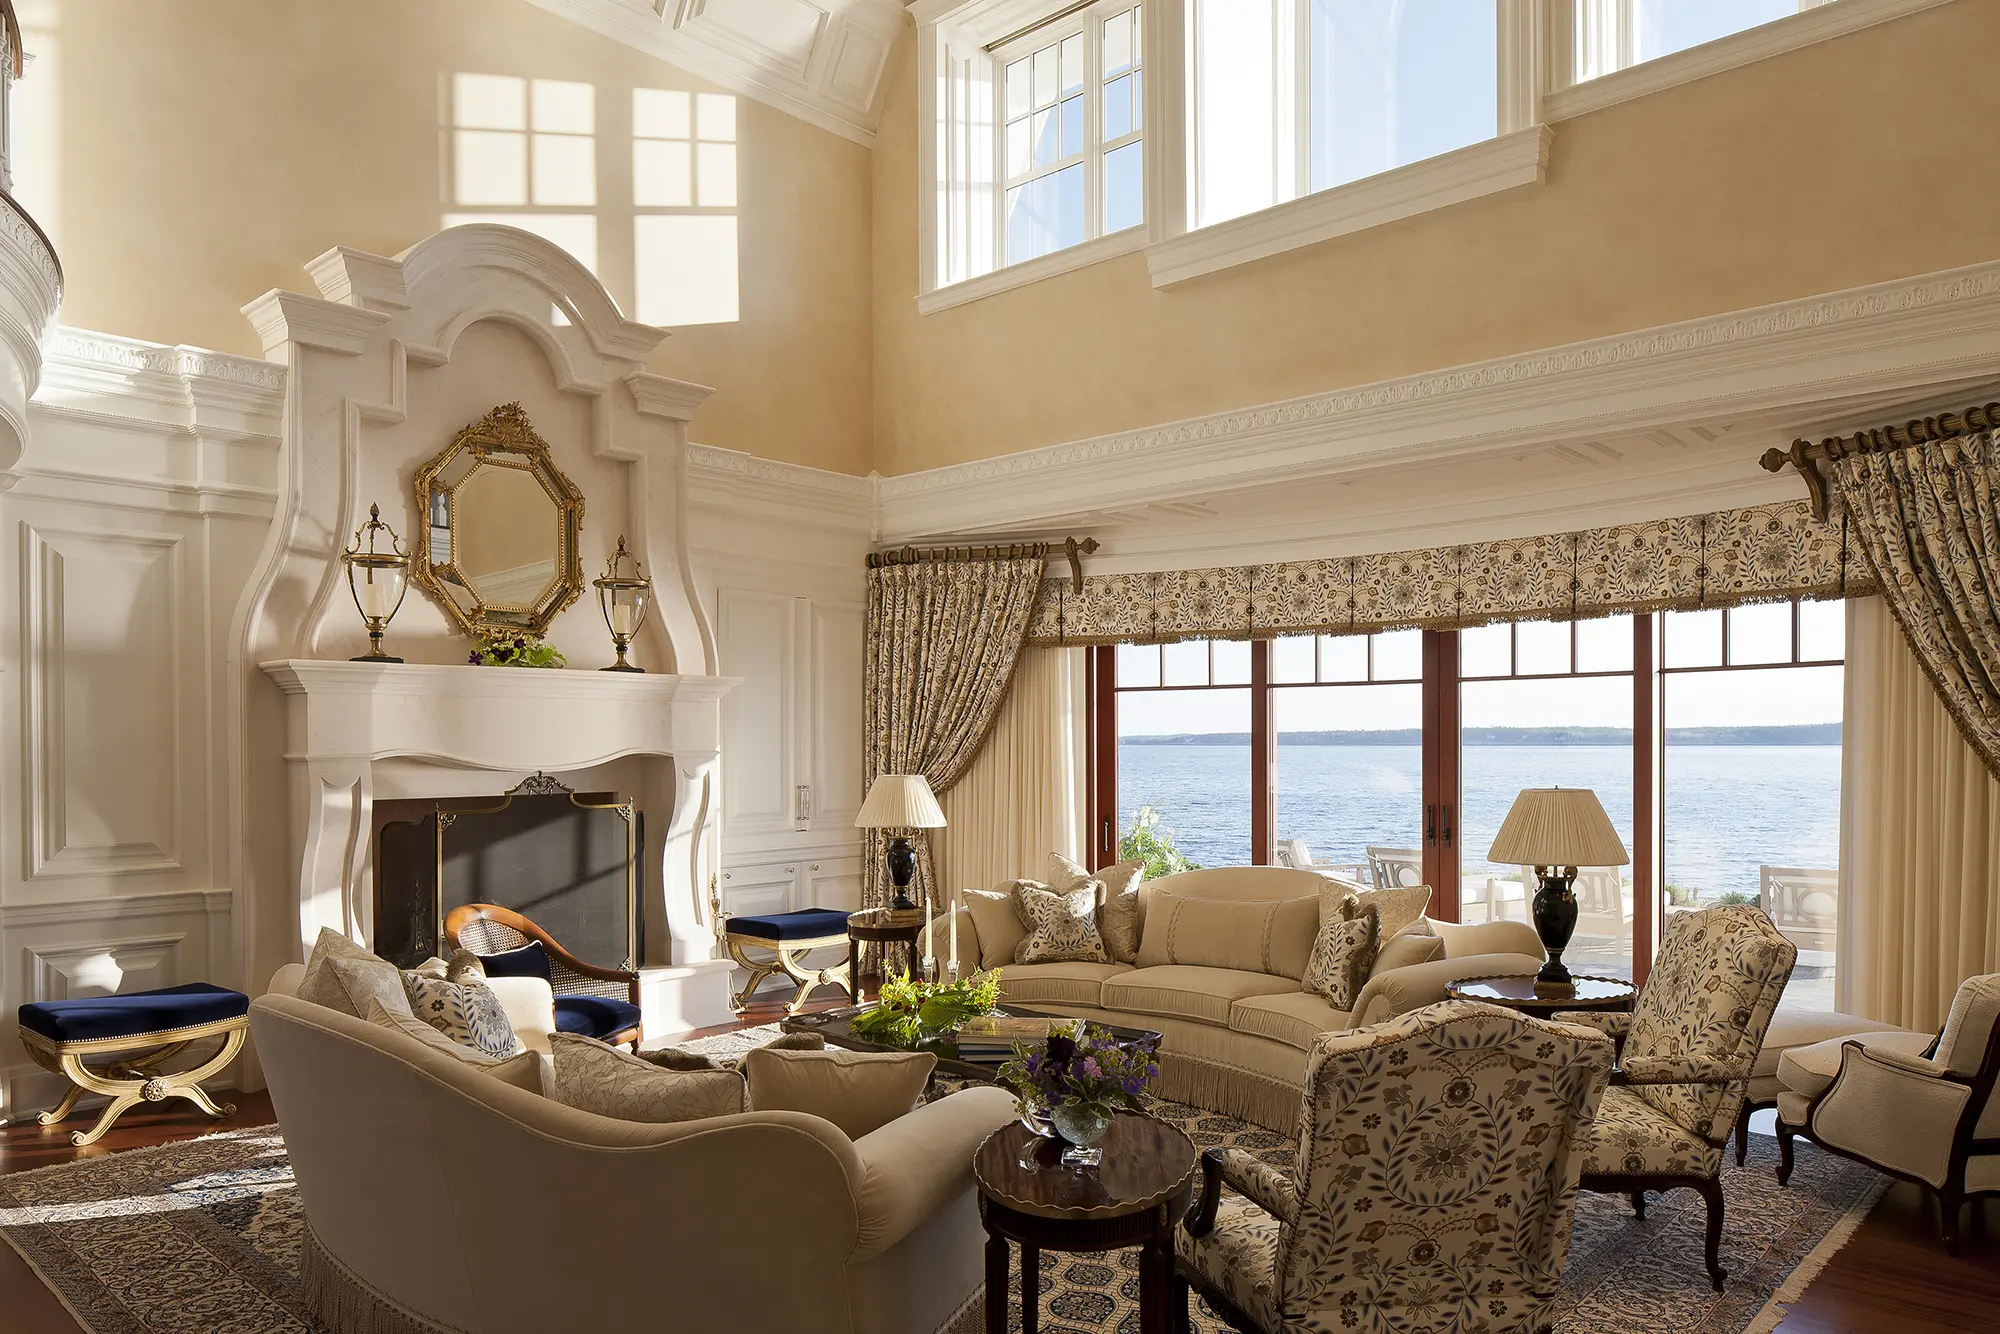 Open living room with extravagant, carved fireplace hearth